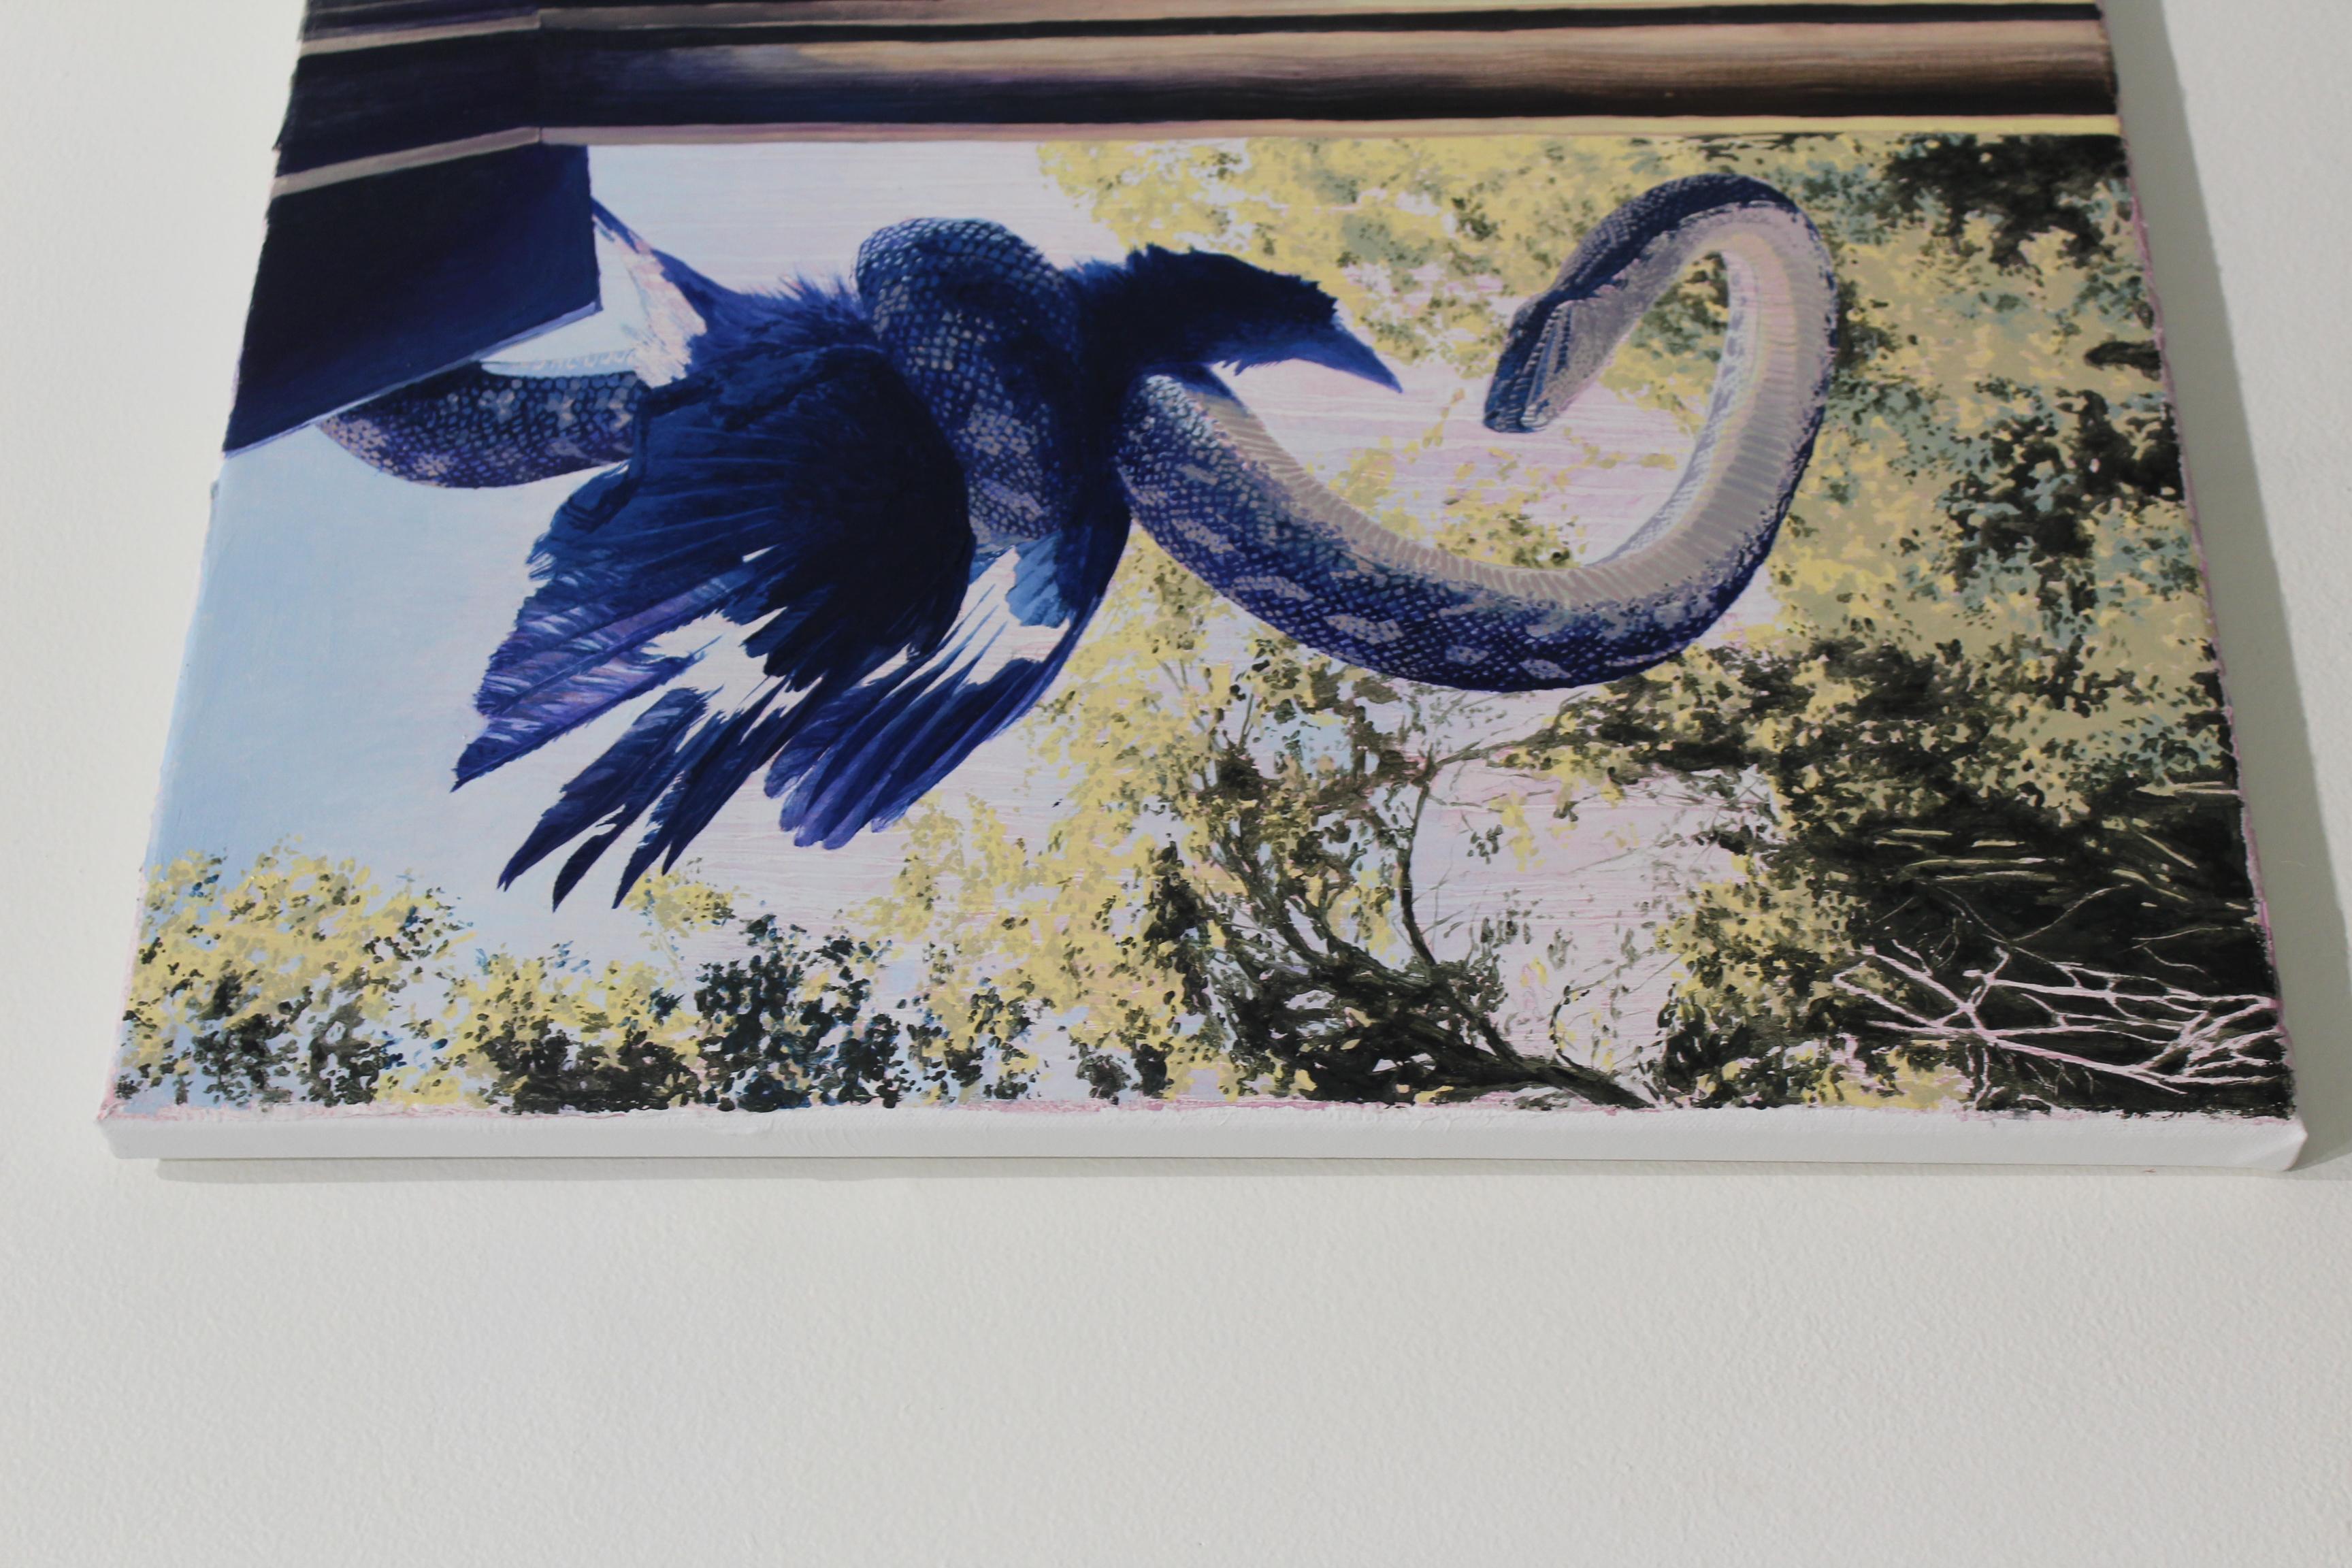 Snake vs. Bird - Painting by Paige DeVries